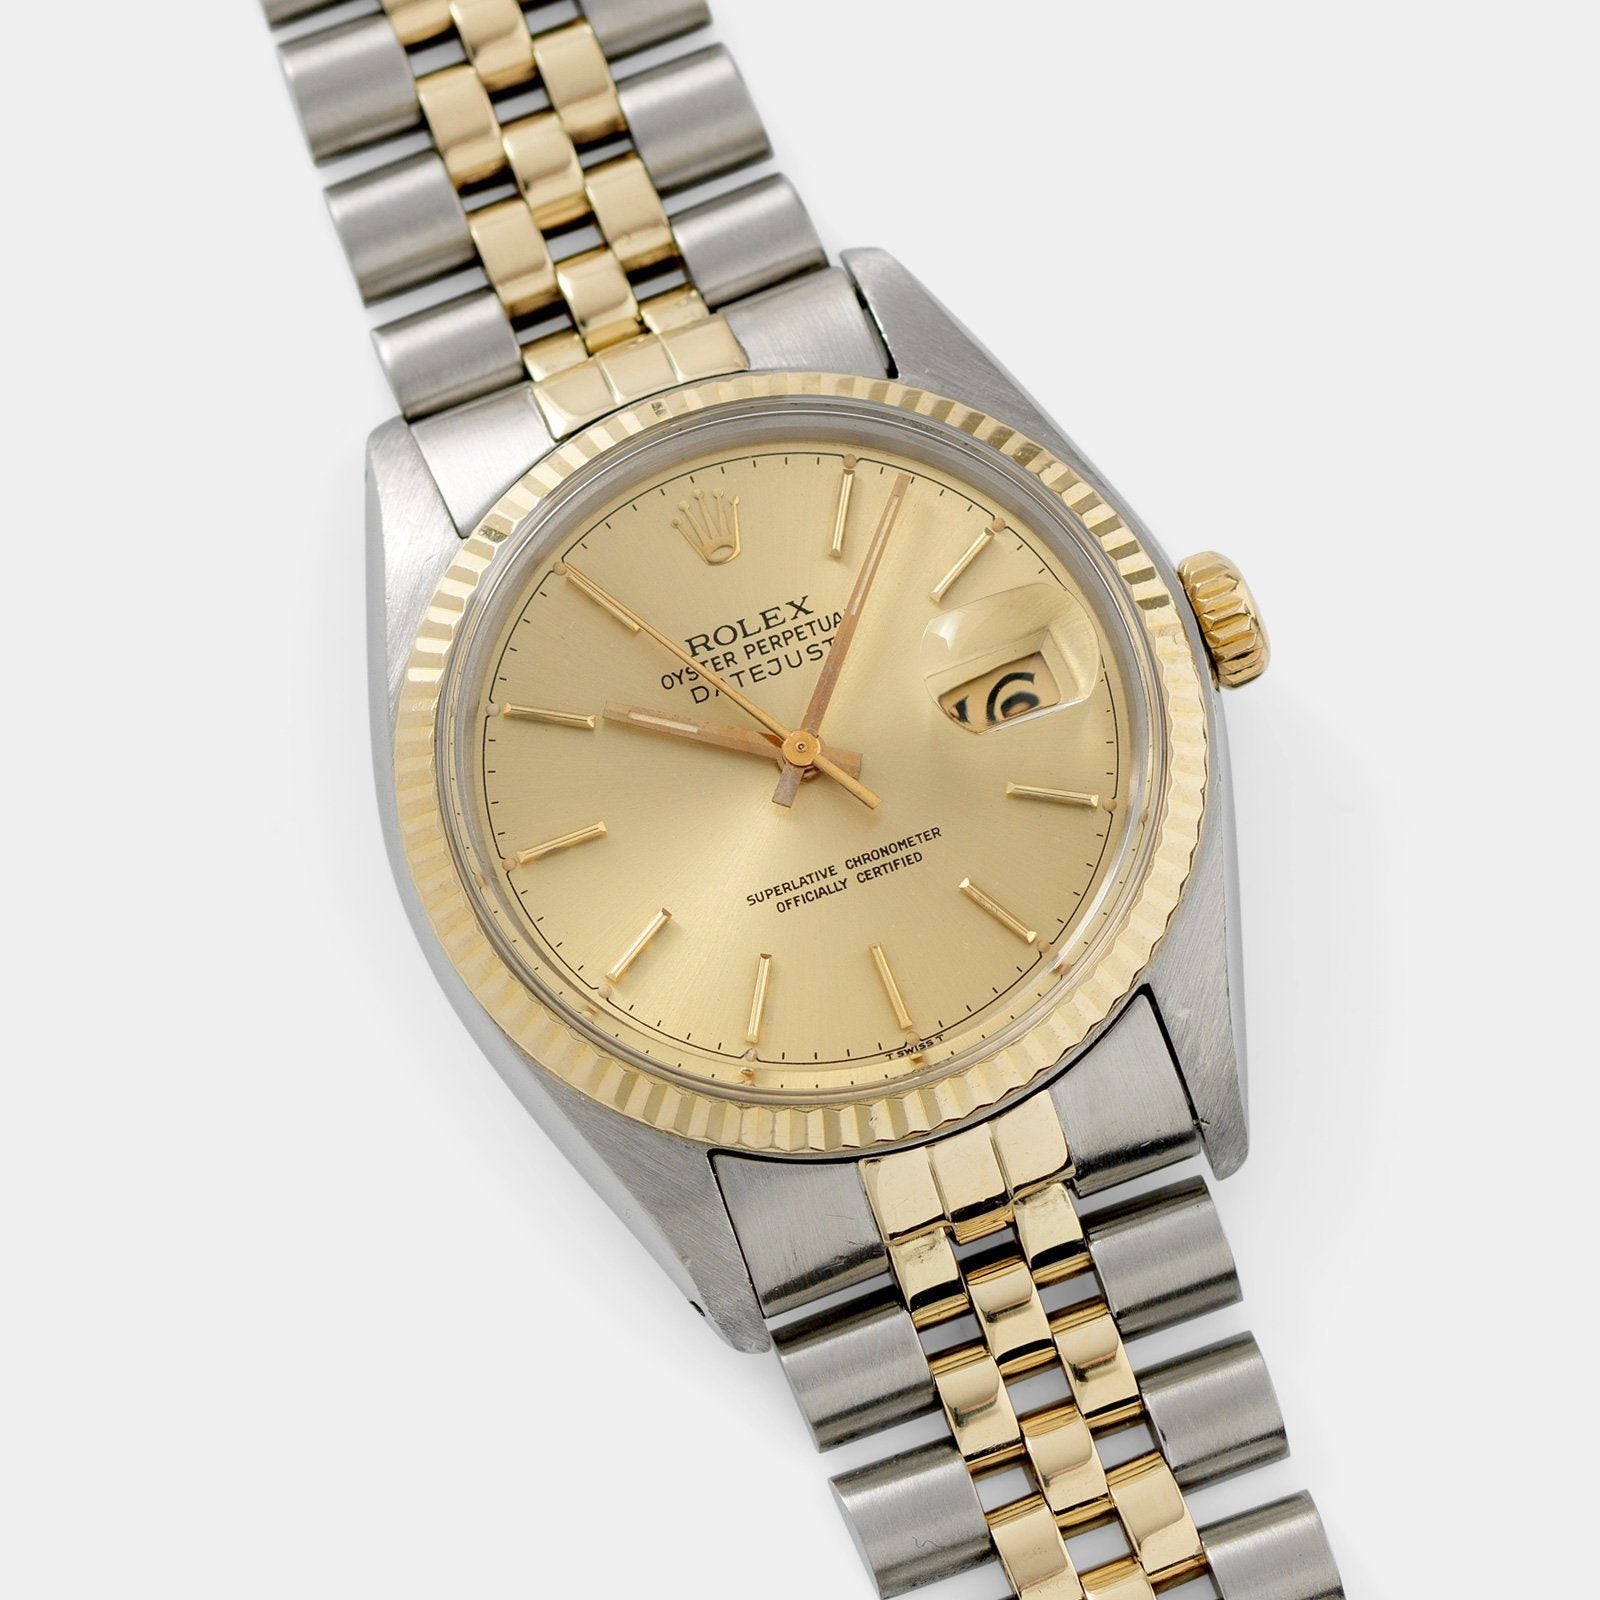 Rolex Datejust Steel and Gold 16013 Champagne Dial